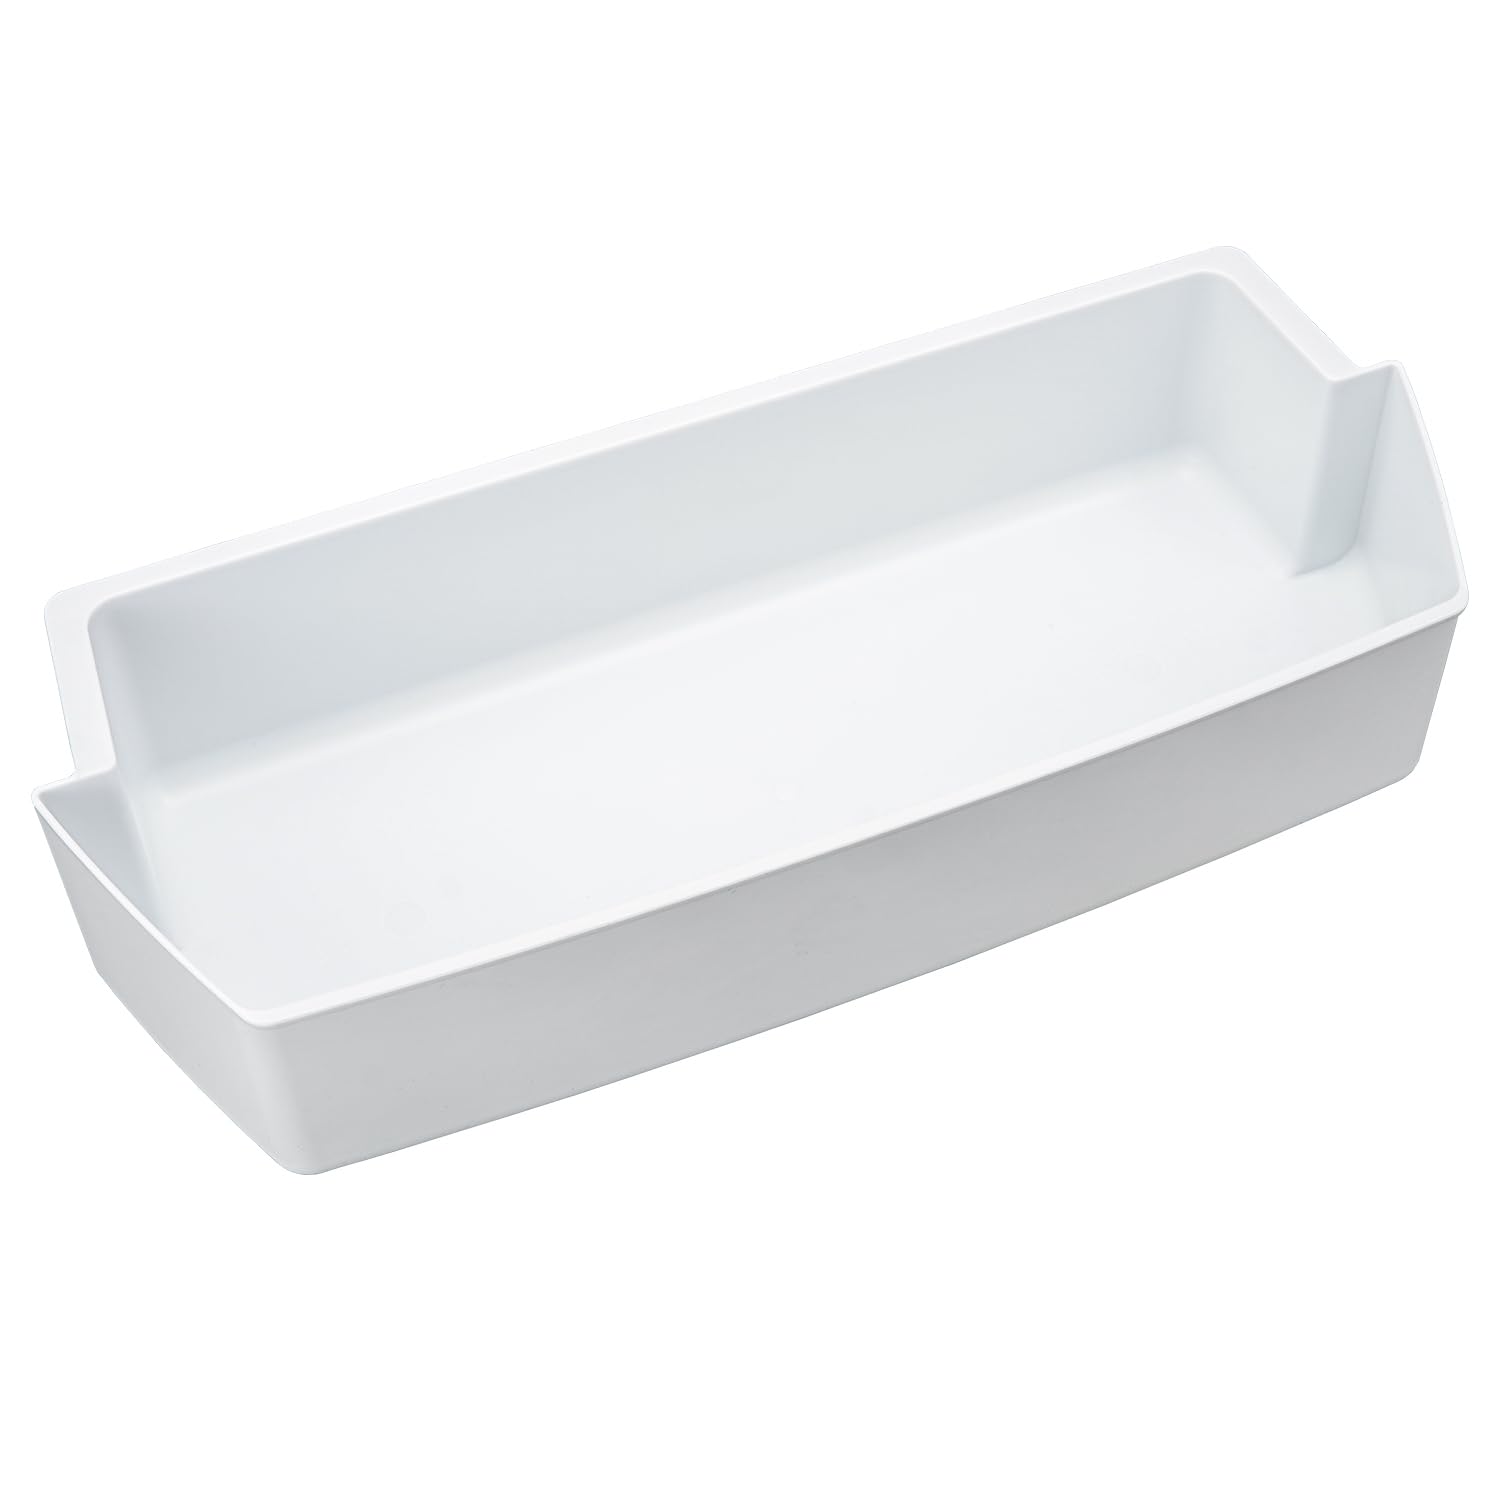 Siwdoy 2187172 Door Shelf Bin Compatible with Whirlpool Kenmore Amana Refrigerator Replaces WP2187172, 2187194K, AP3853103, PS328468, White